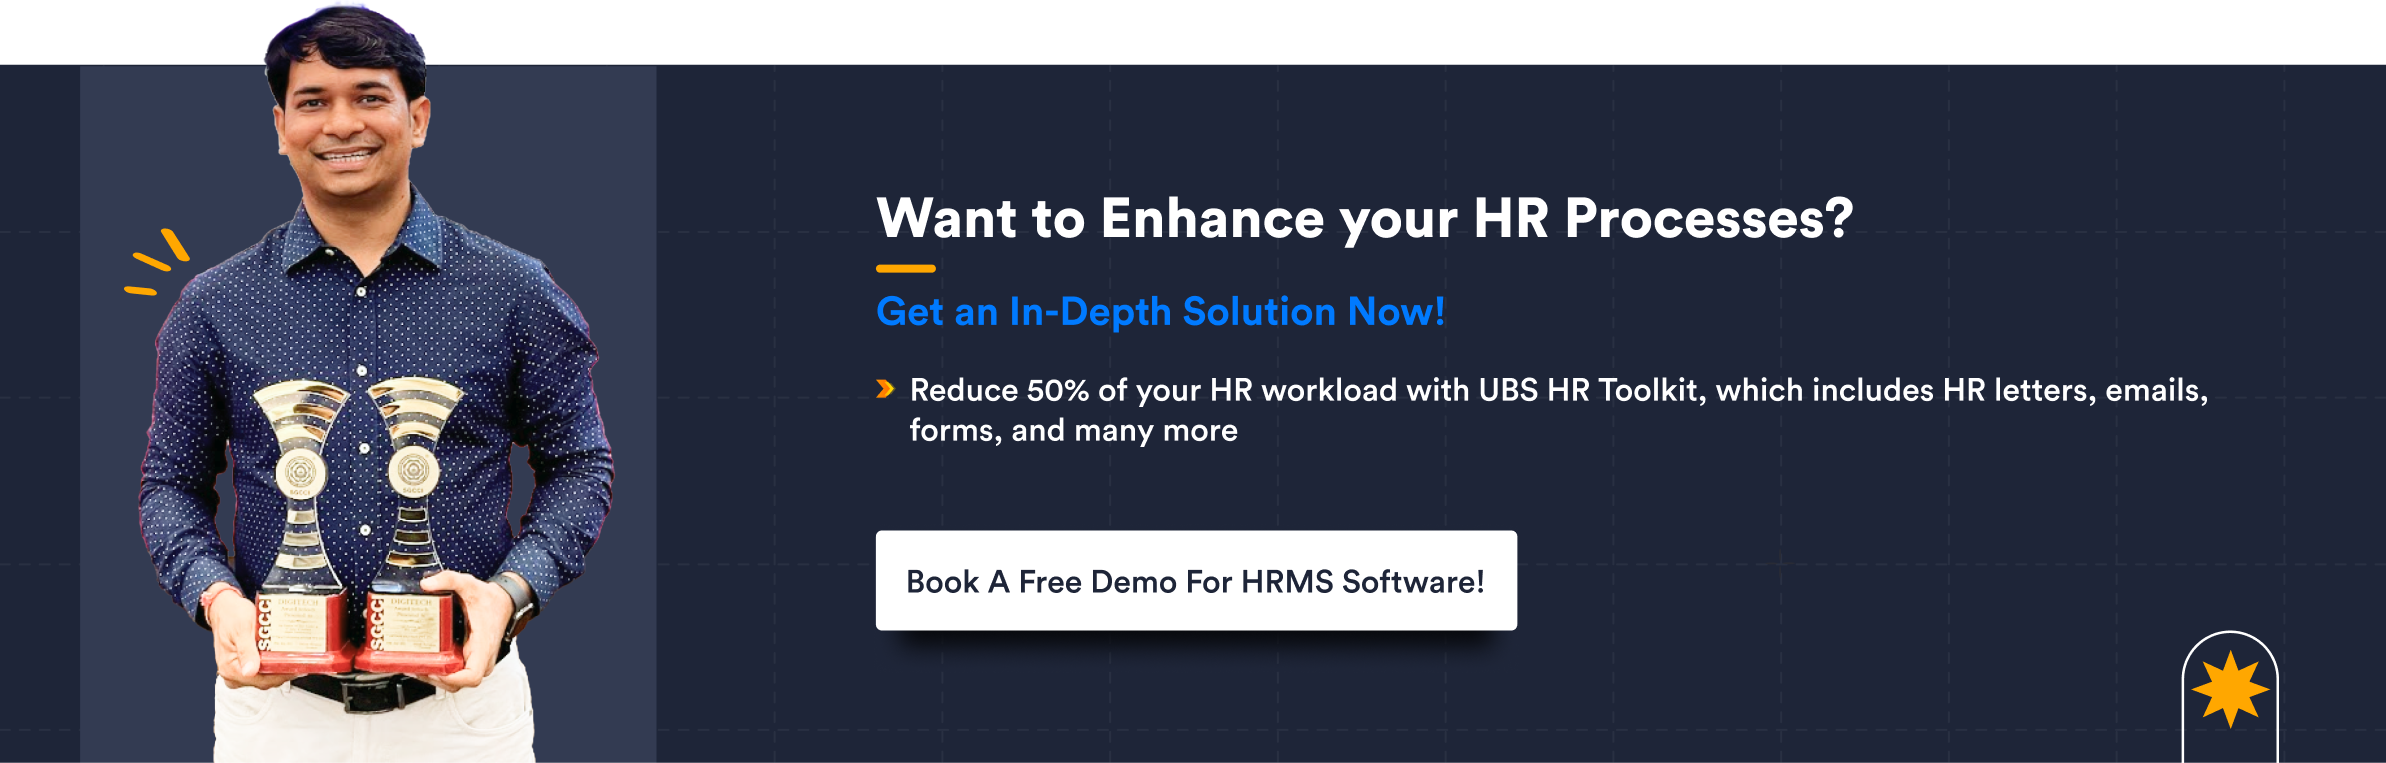 Want to Enhance your HR Processes 1 2